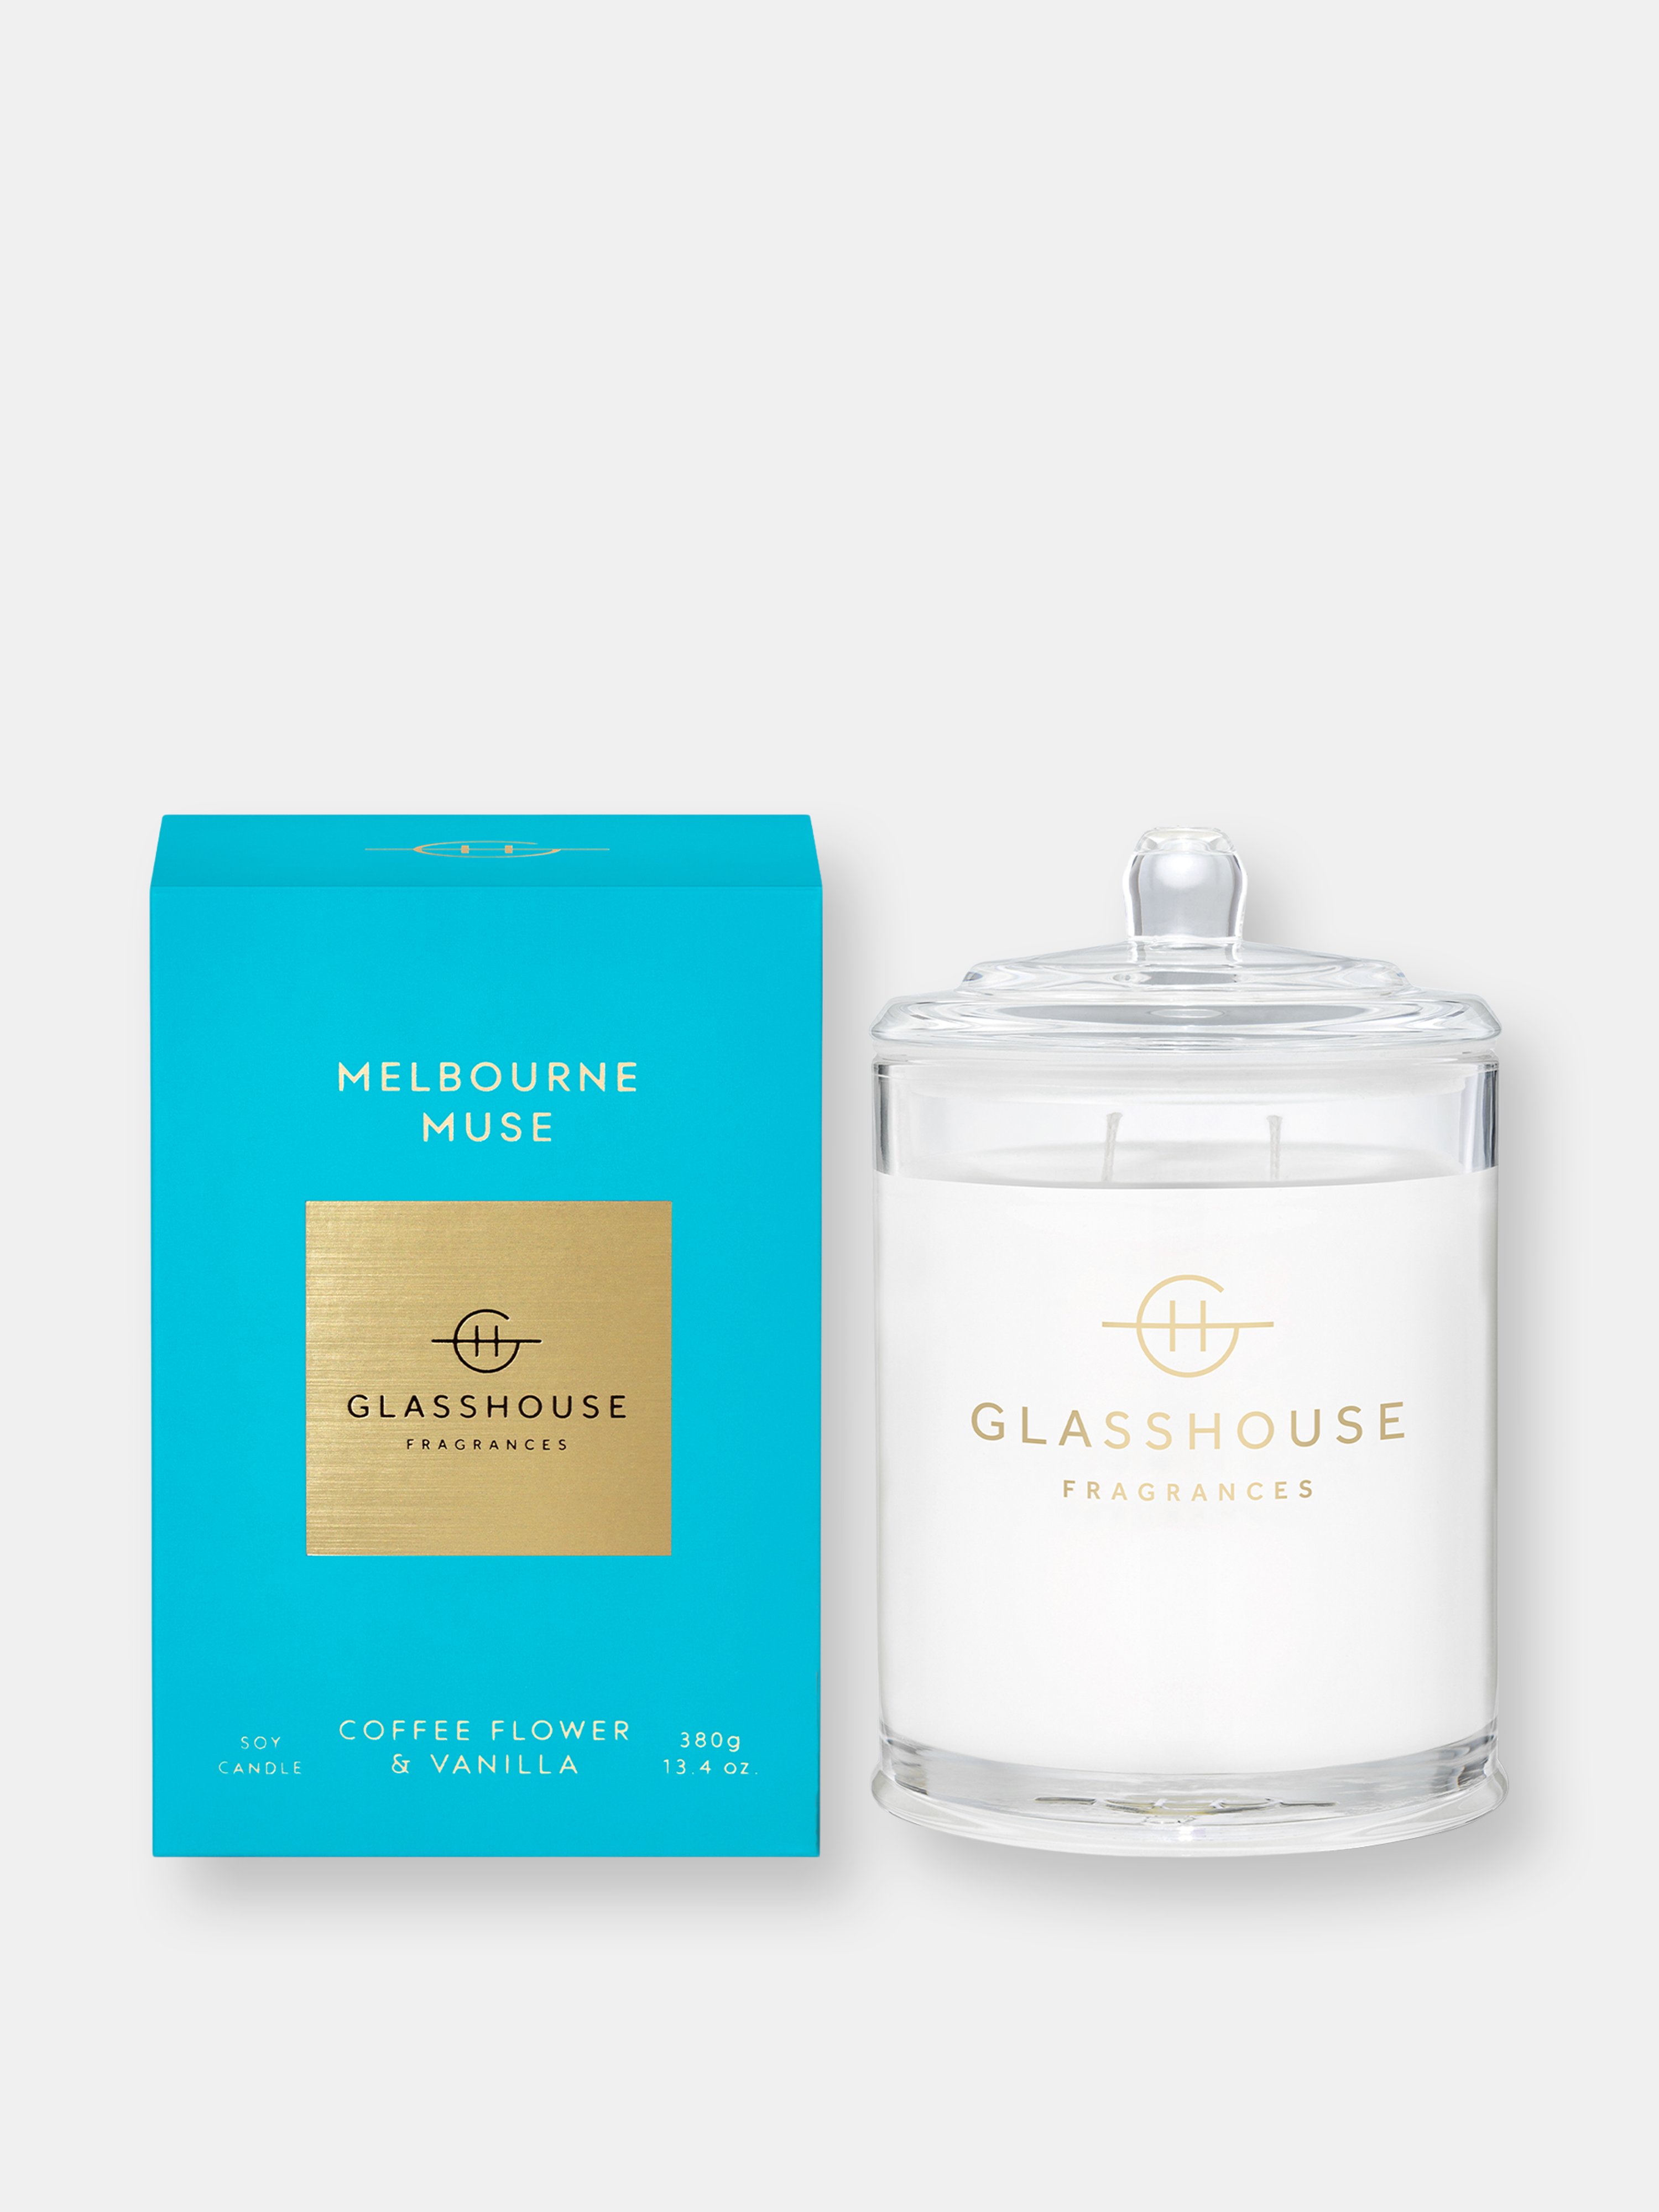 Glasshouse Fragrances Melbourne Muse 380g Triple Scented Soy Candle